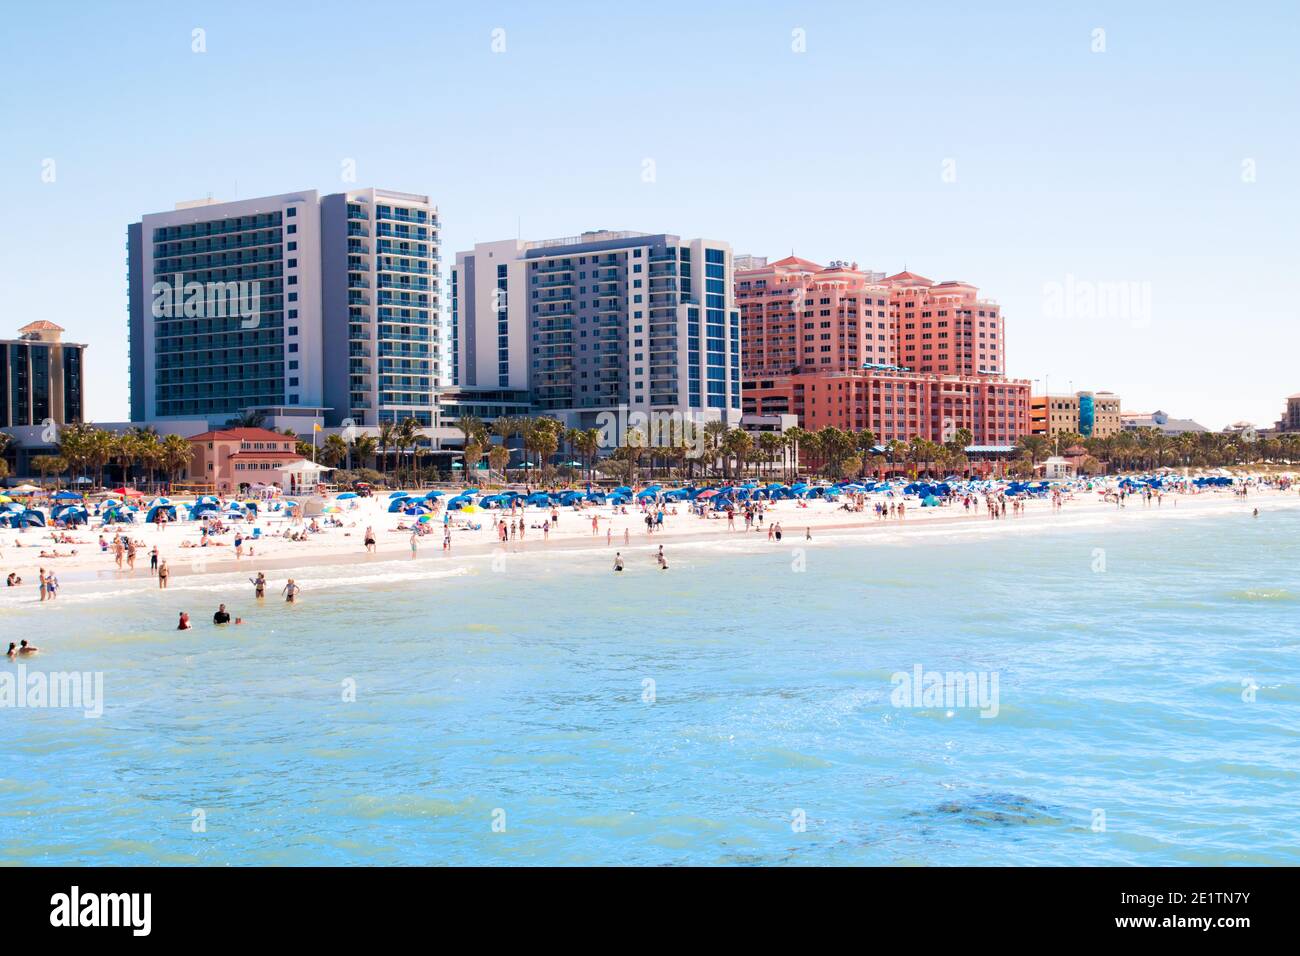 Tropical sandy beach vacation city Clearwater Beach in Florida, colourful beachfront hotel resorts buildings, sea and sunbathing tourists Stock Photo